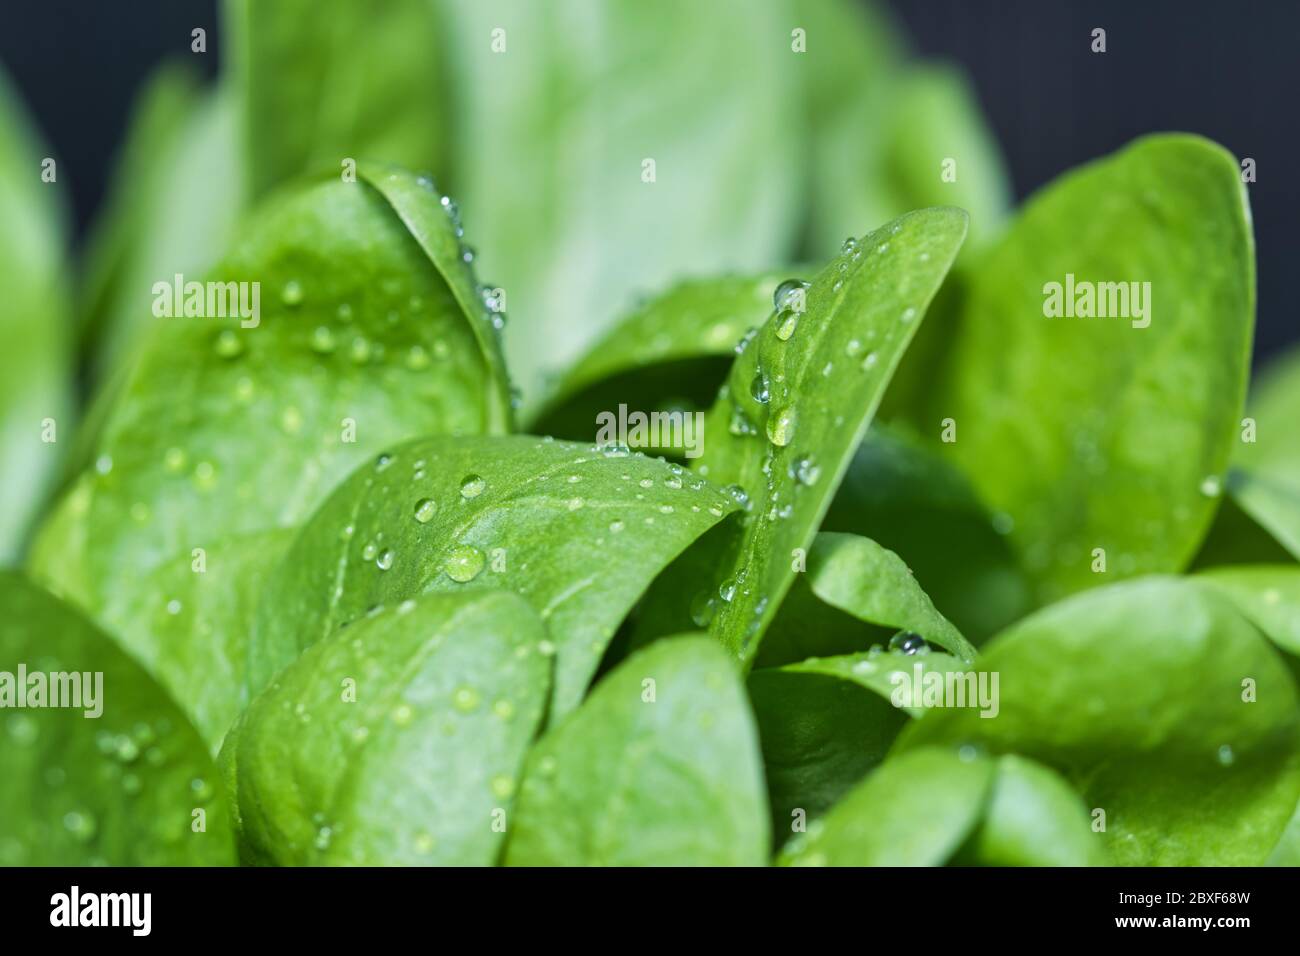 Spinach baby leaf growing in the spring garden, fresh green leaves with water drops on, close up, healthy organic food and self sufficency concept Stock Photo